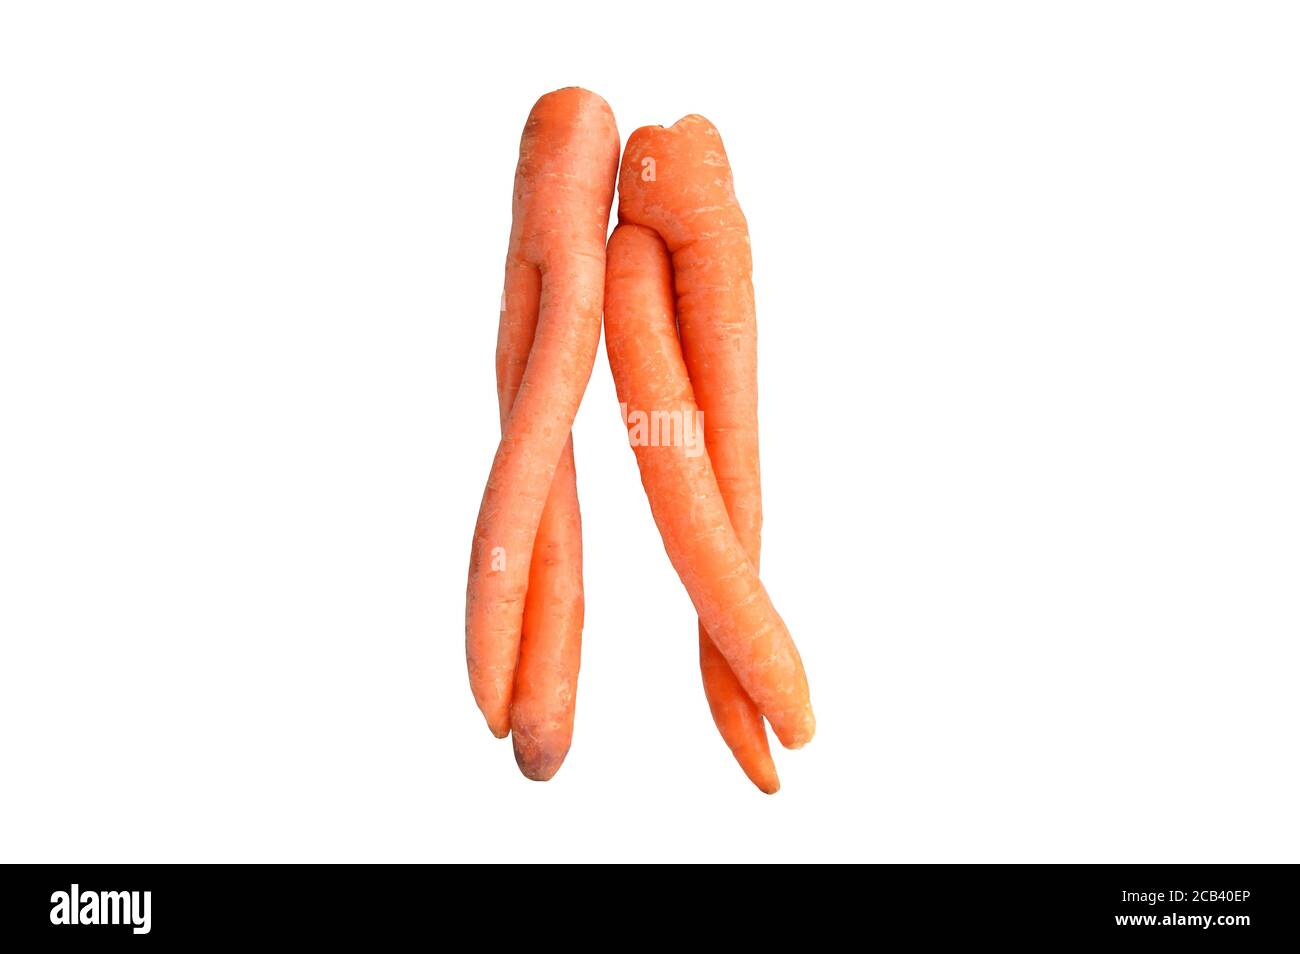 Human shaped carrot couple standing side by side Stock Photo